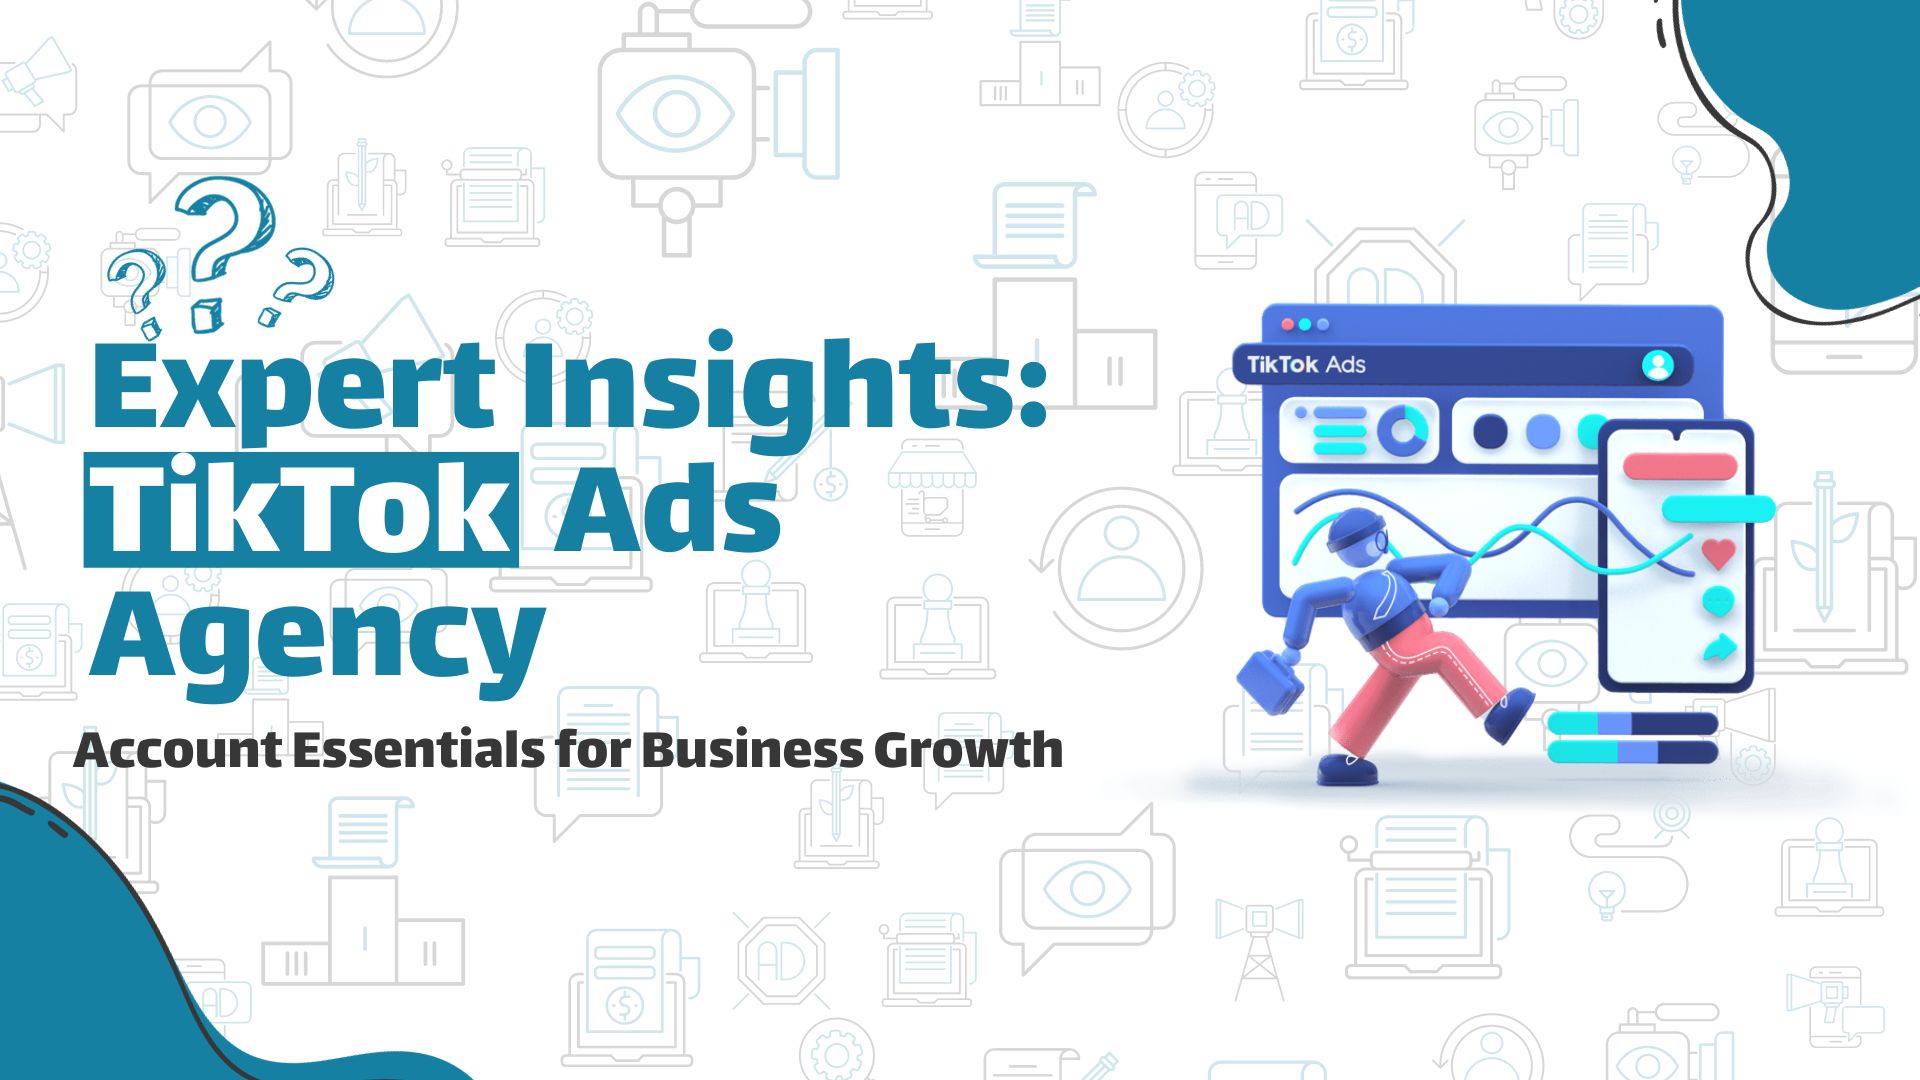 Expert Insights TikTok Ads Agency Account Essentials for Business Growth